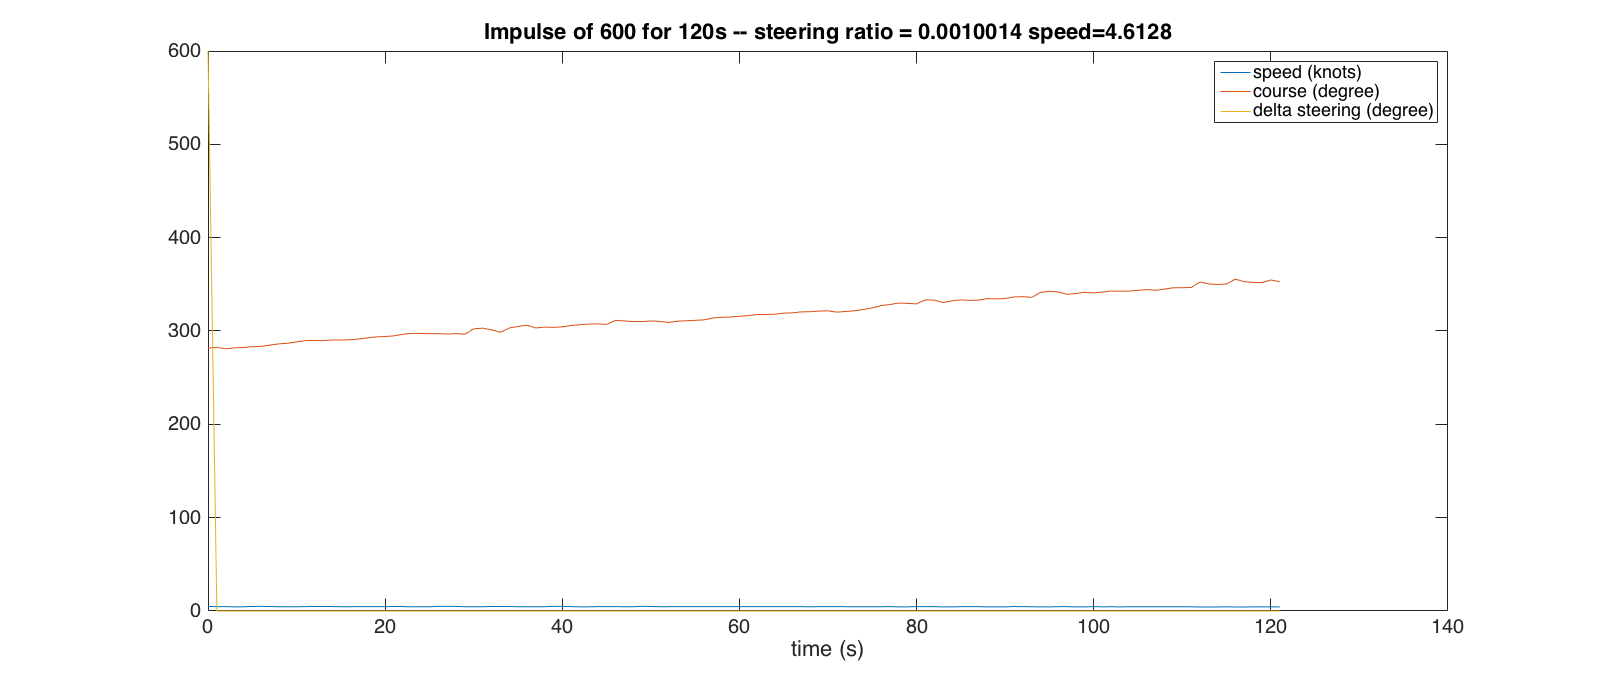 Impulse response for a control of 600° of the stepper motor at 4.6 knots